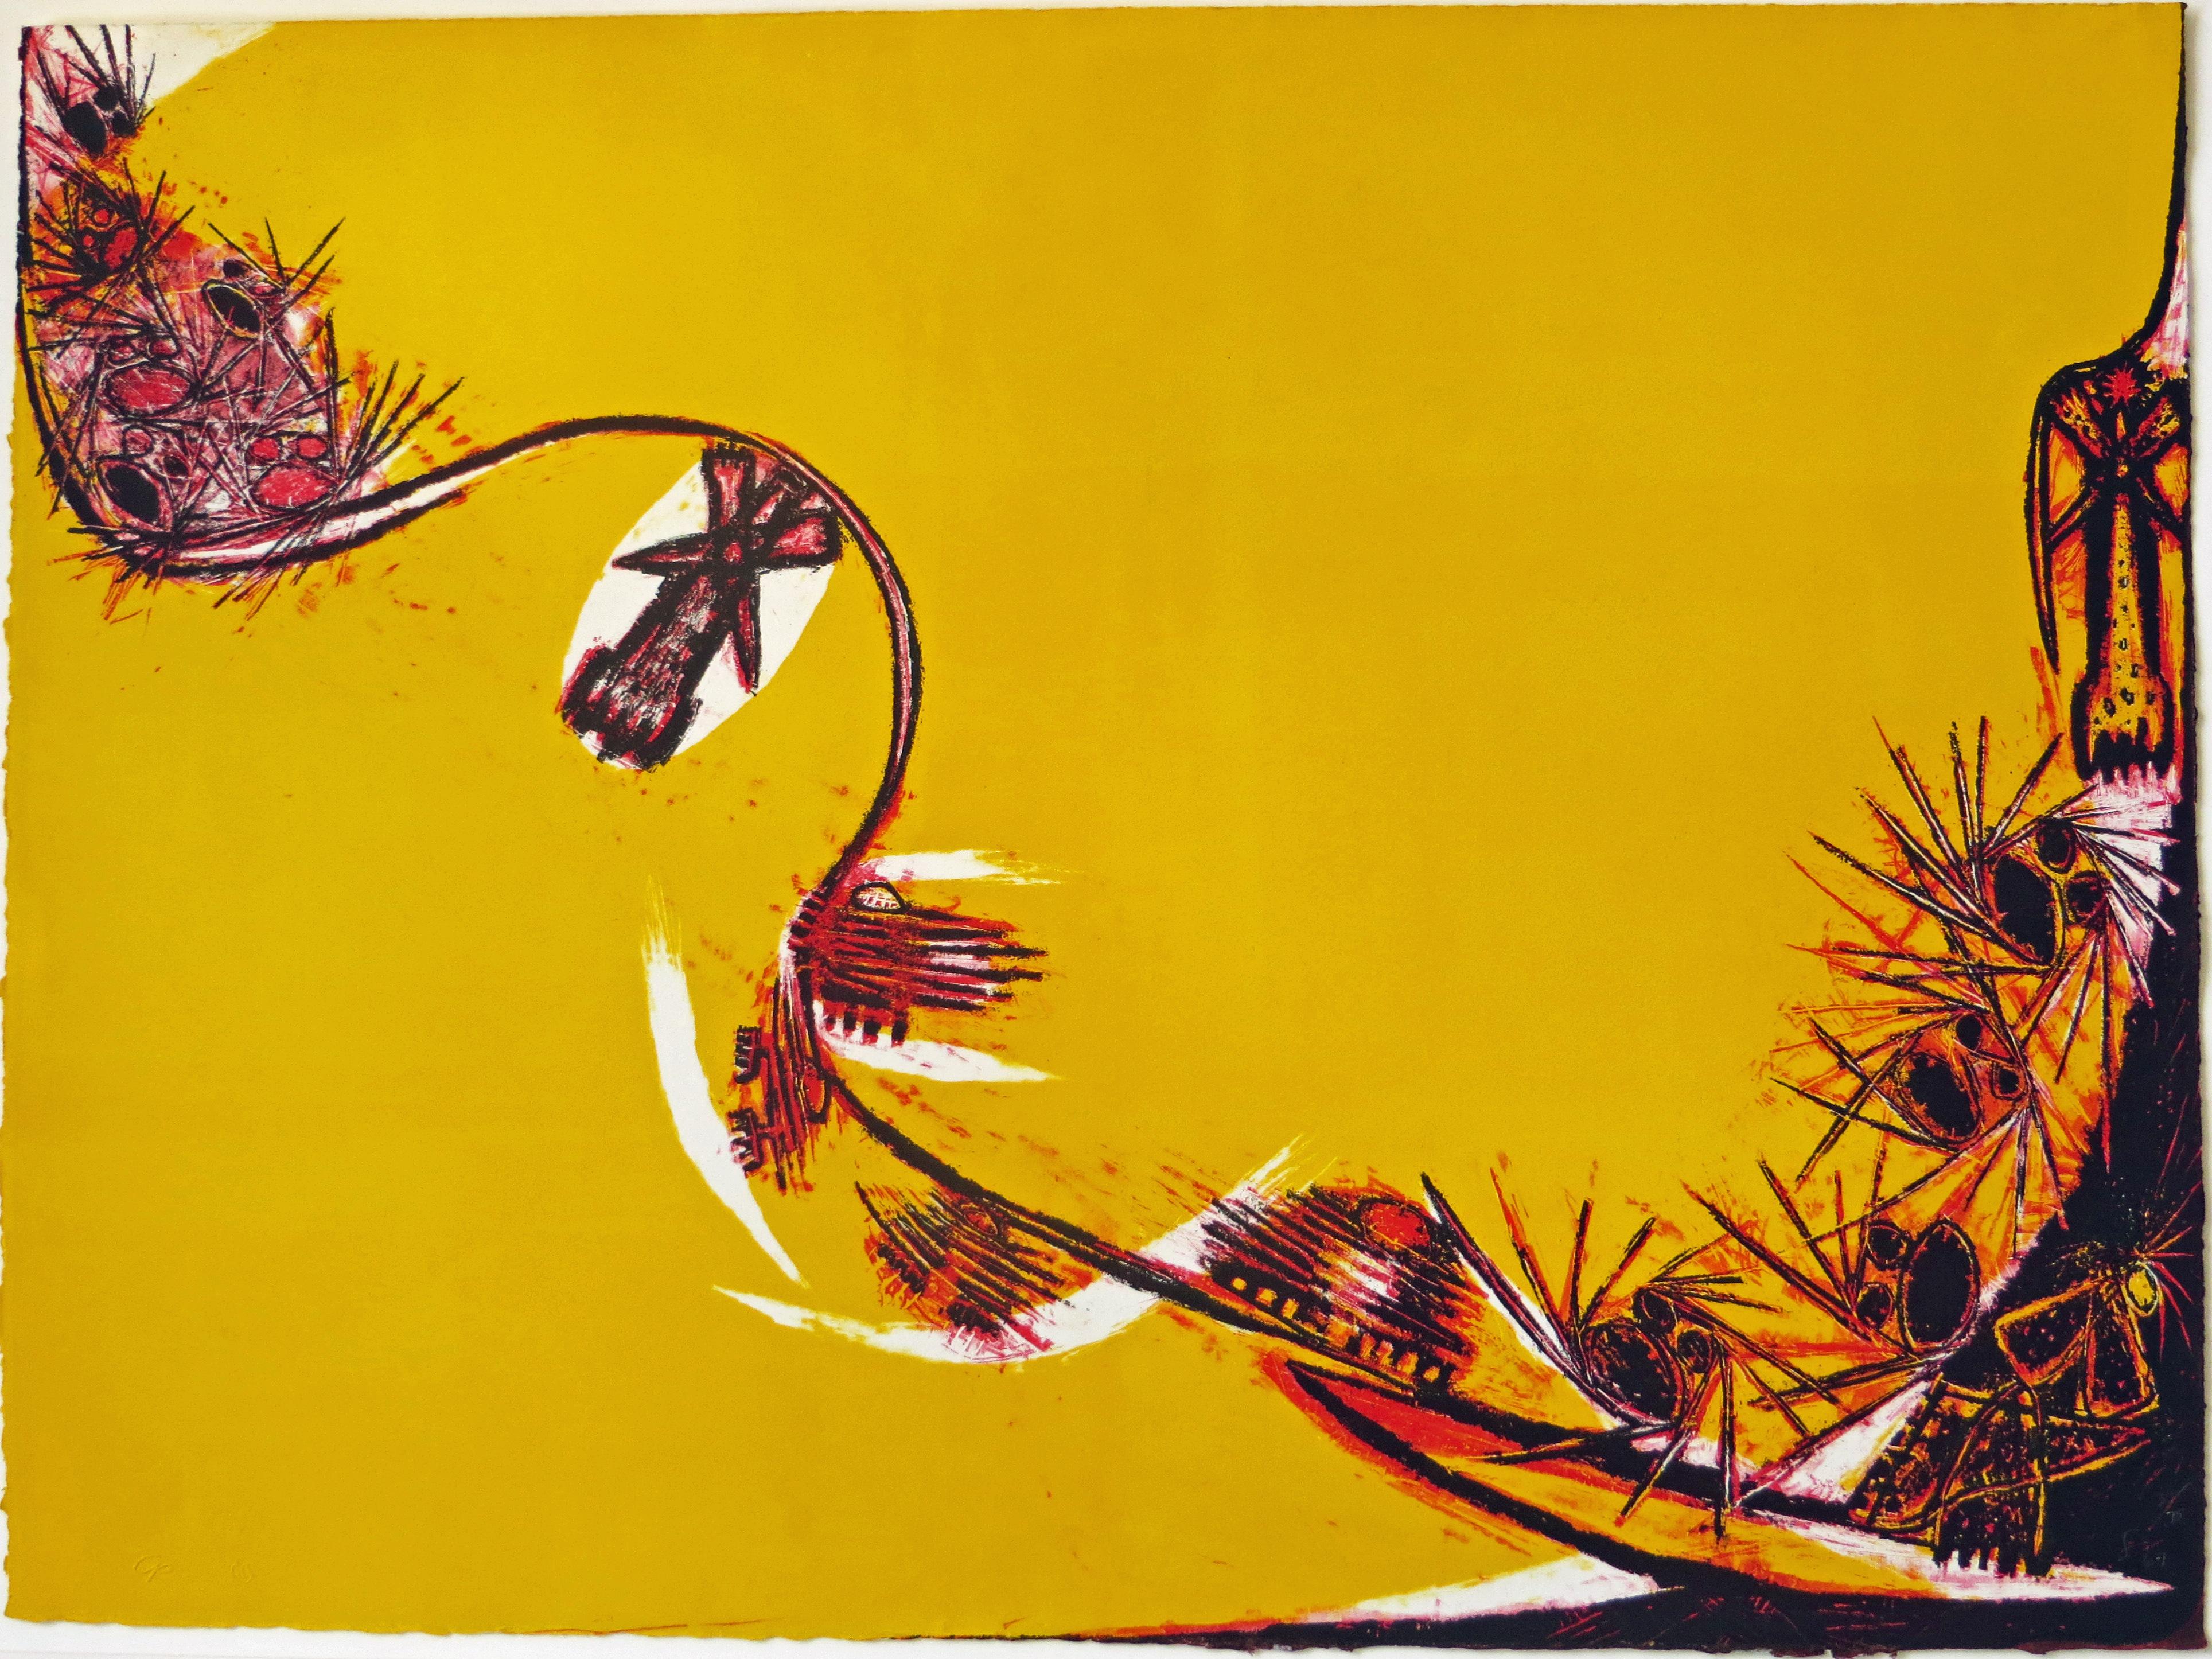 Frank Lobdell Abstract Print - Untitled - Lithograph from the Portfolio "10 West Coast Artists"